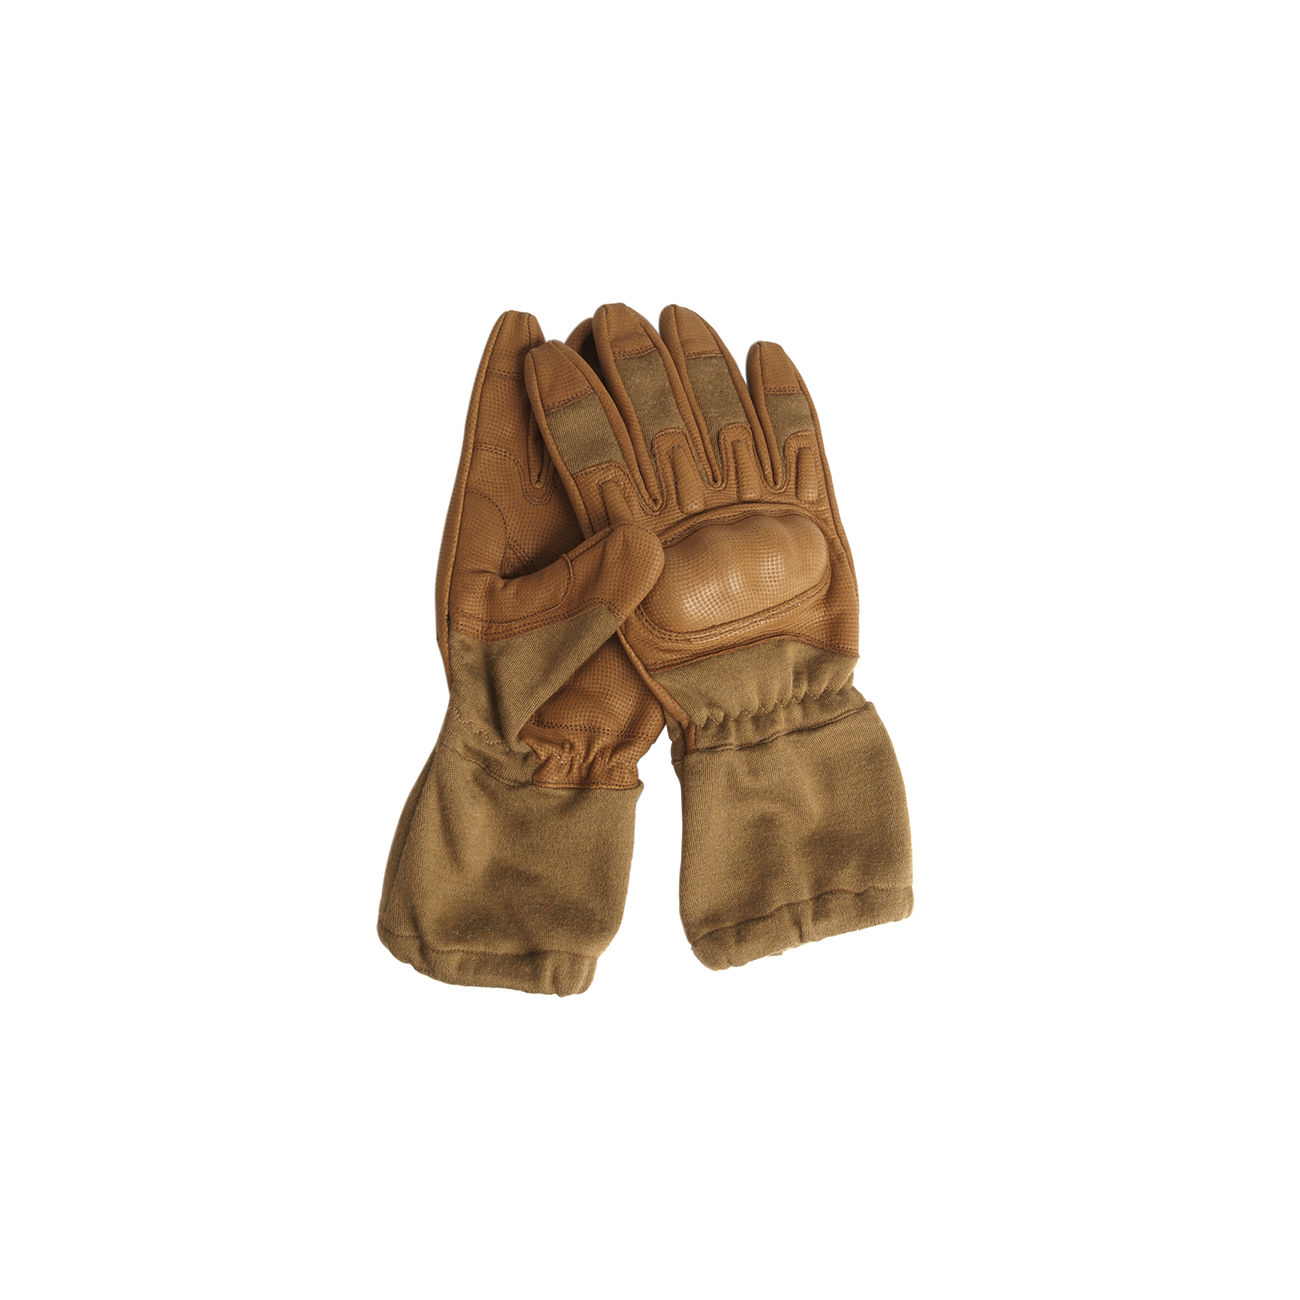 Outdoor Stulpe foliage Camping Military -NEU Nomex Action Gloves m 